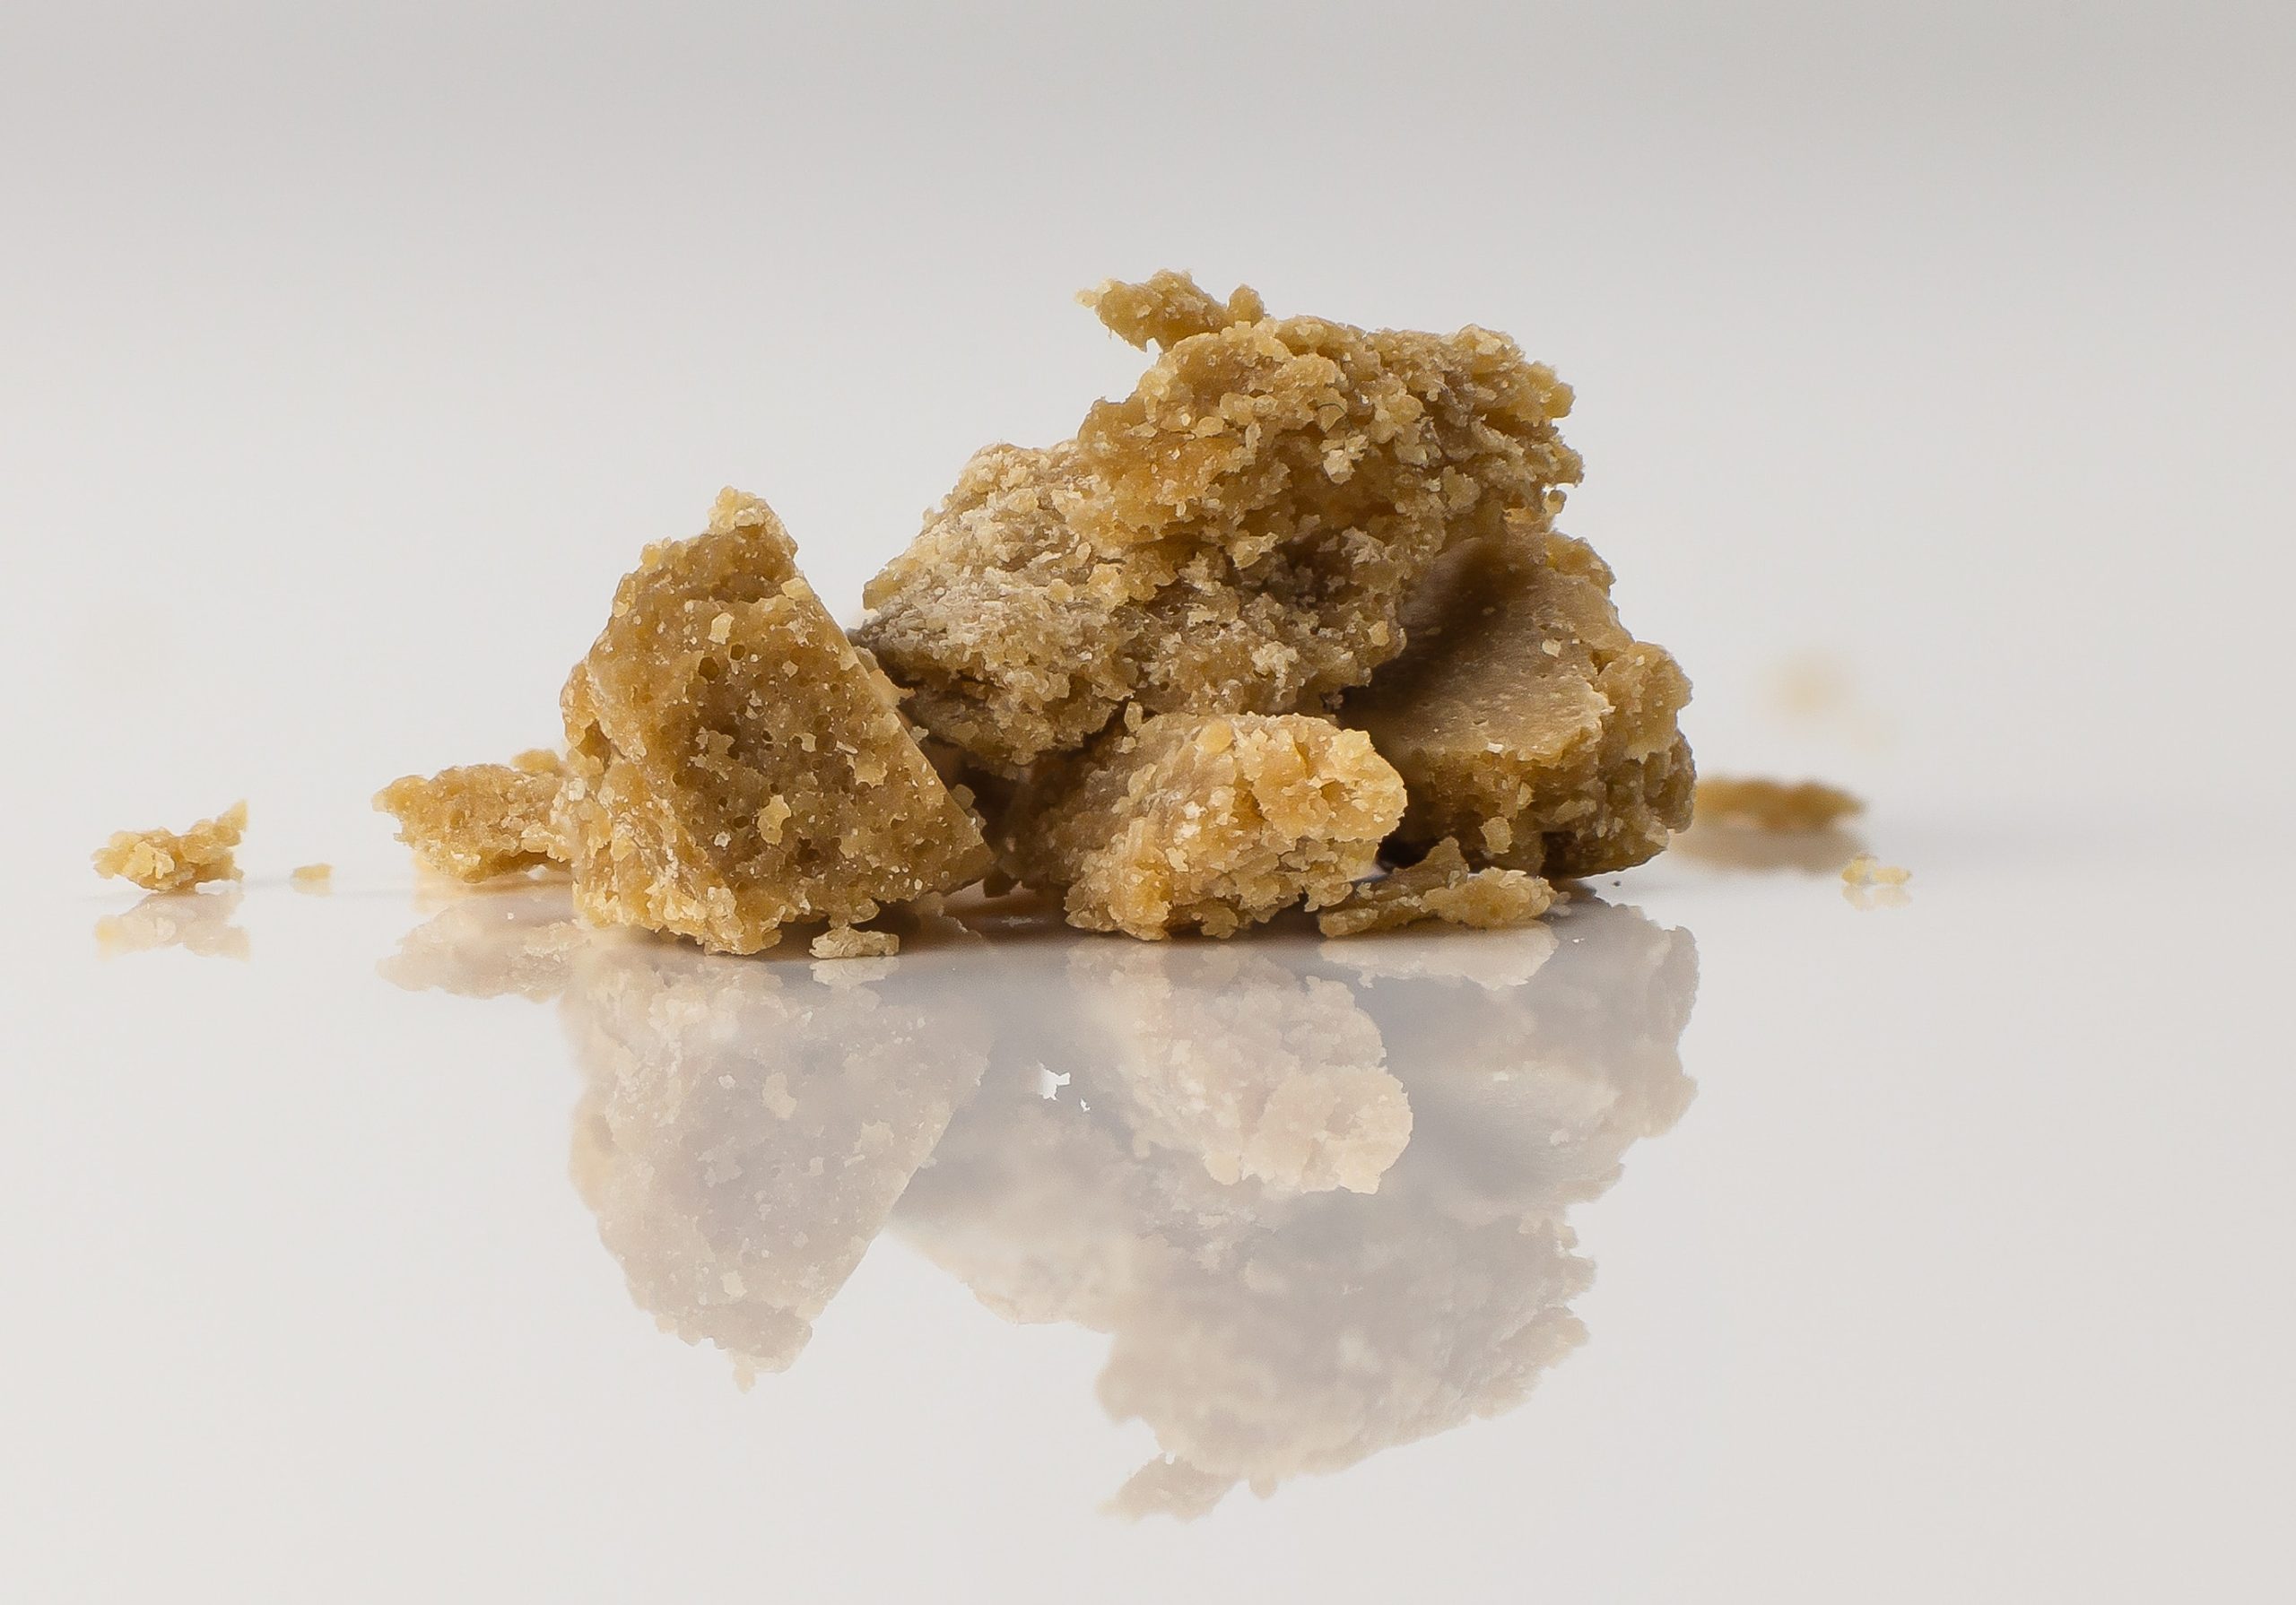 cannabis concentrate atop a white table surface